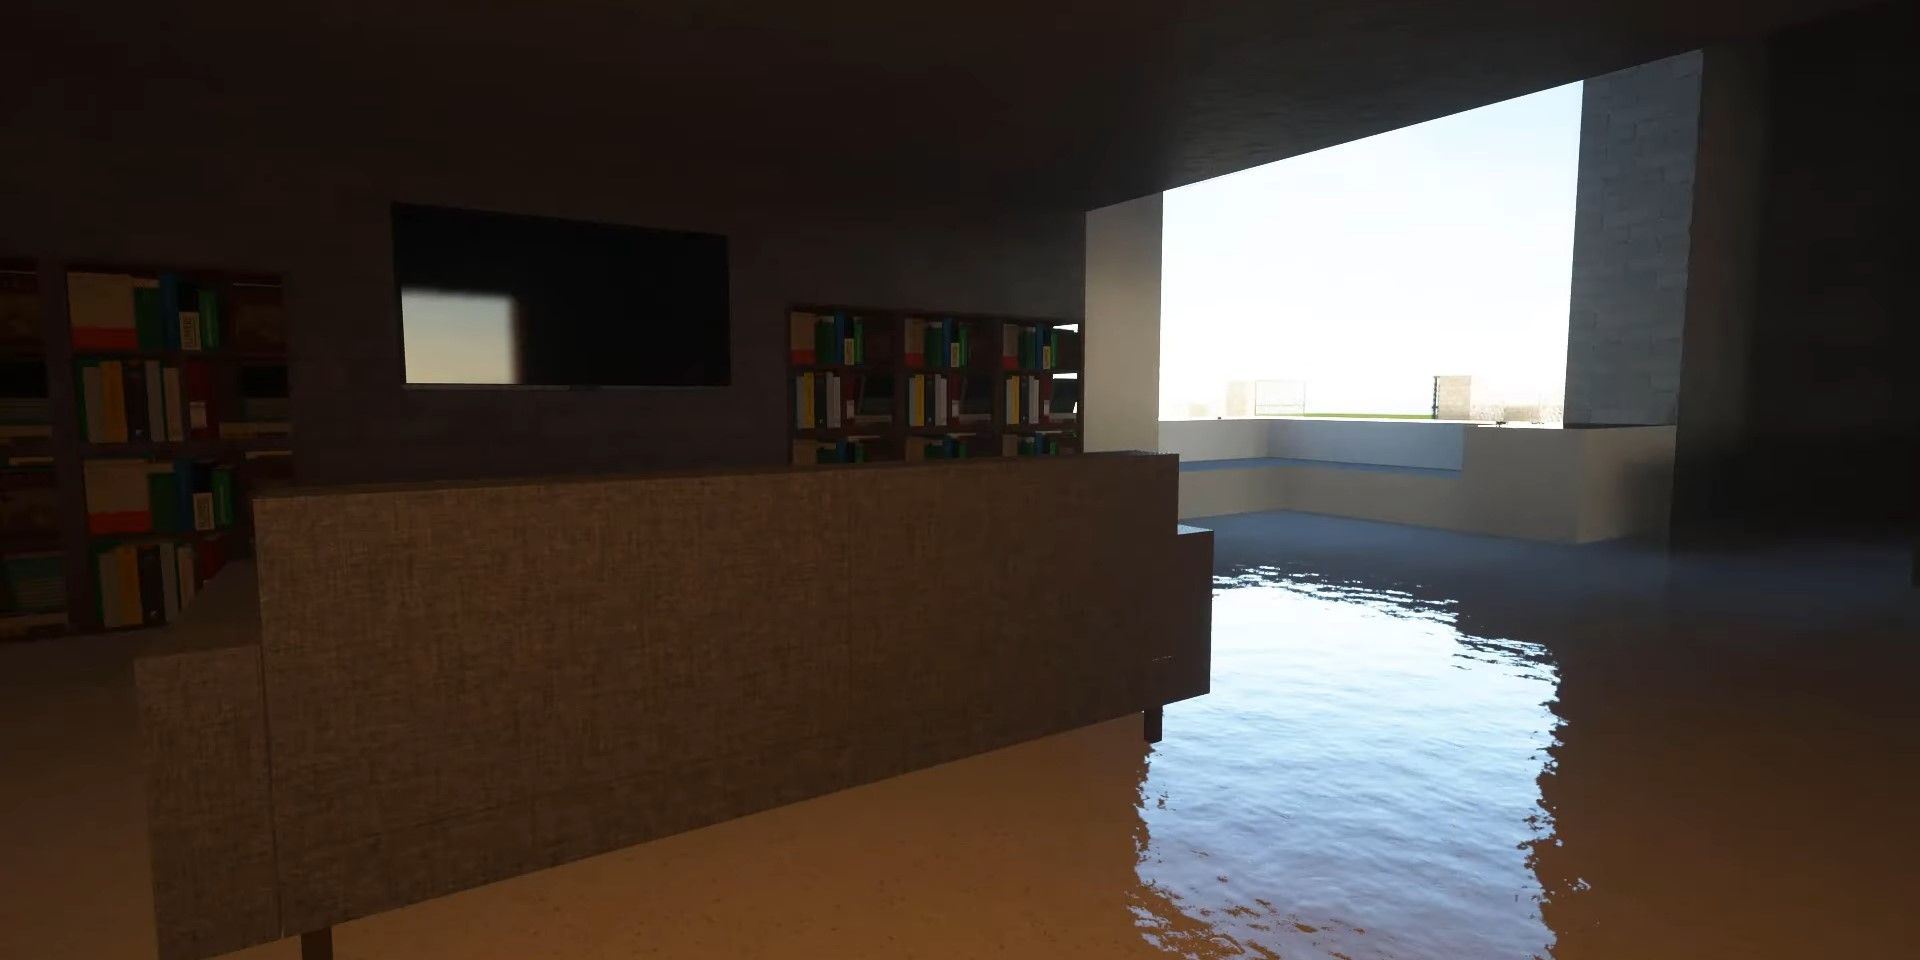 An interior of a building including a sofa, bookshelves and a TV created using ModernArch Texture Pack in Minecraft